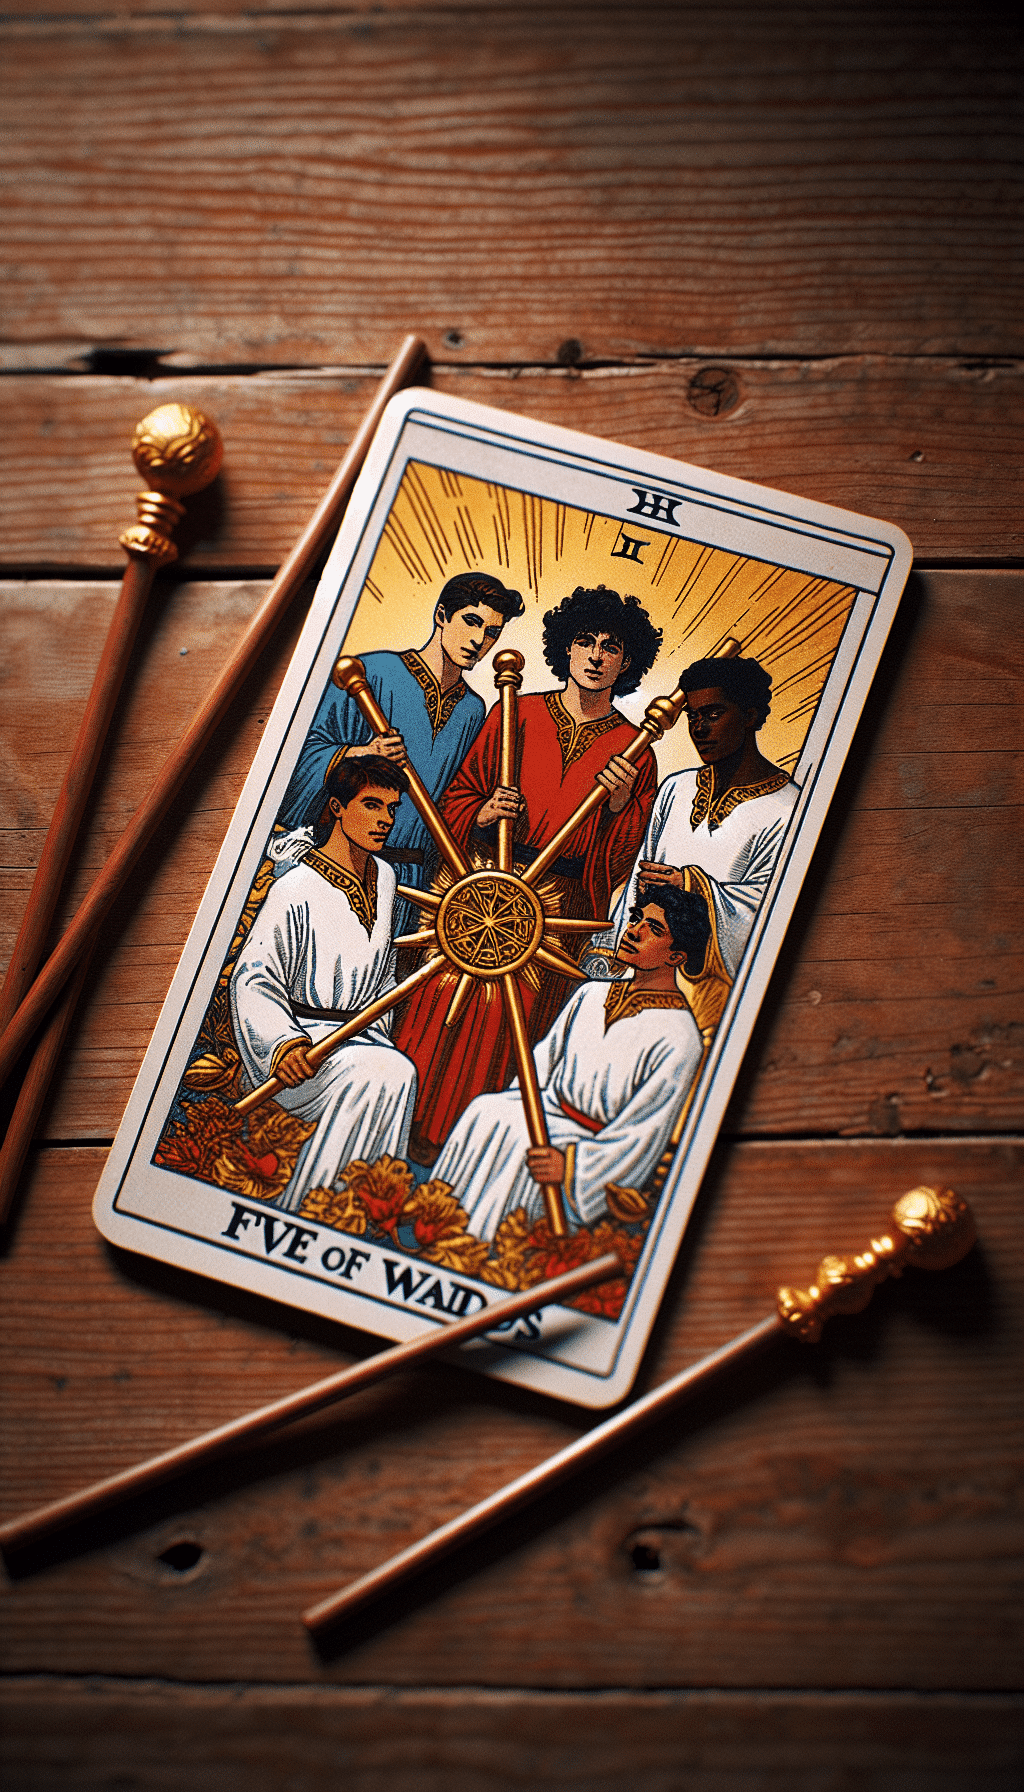 Unlocking Financial Challenges: The Five of Wands in Tarot